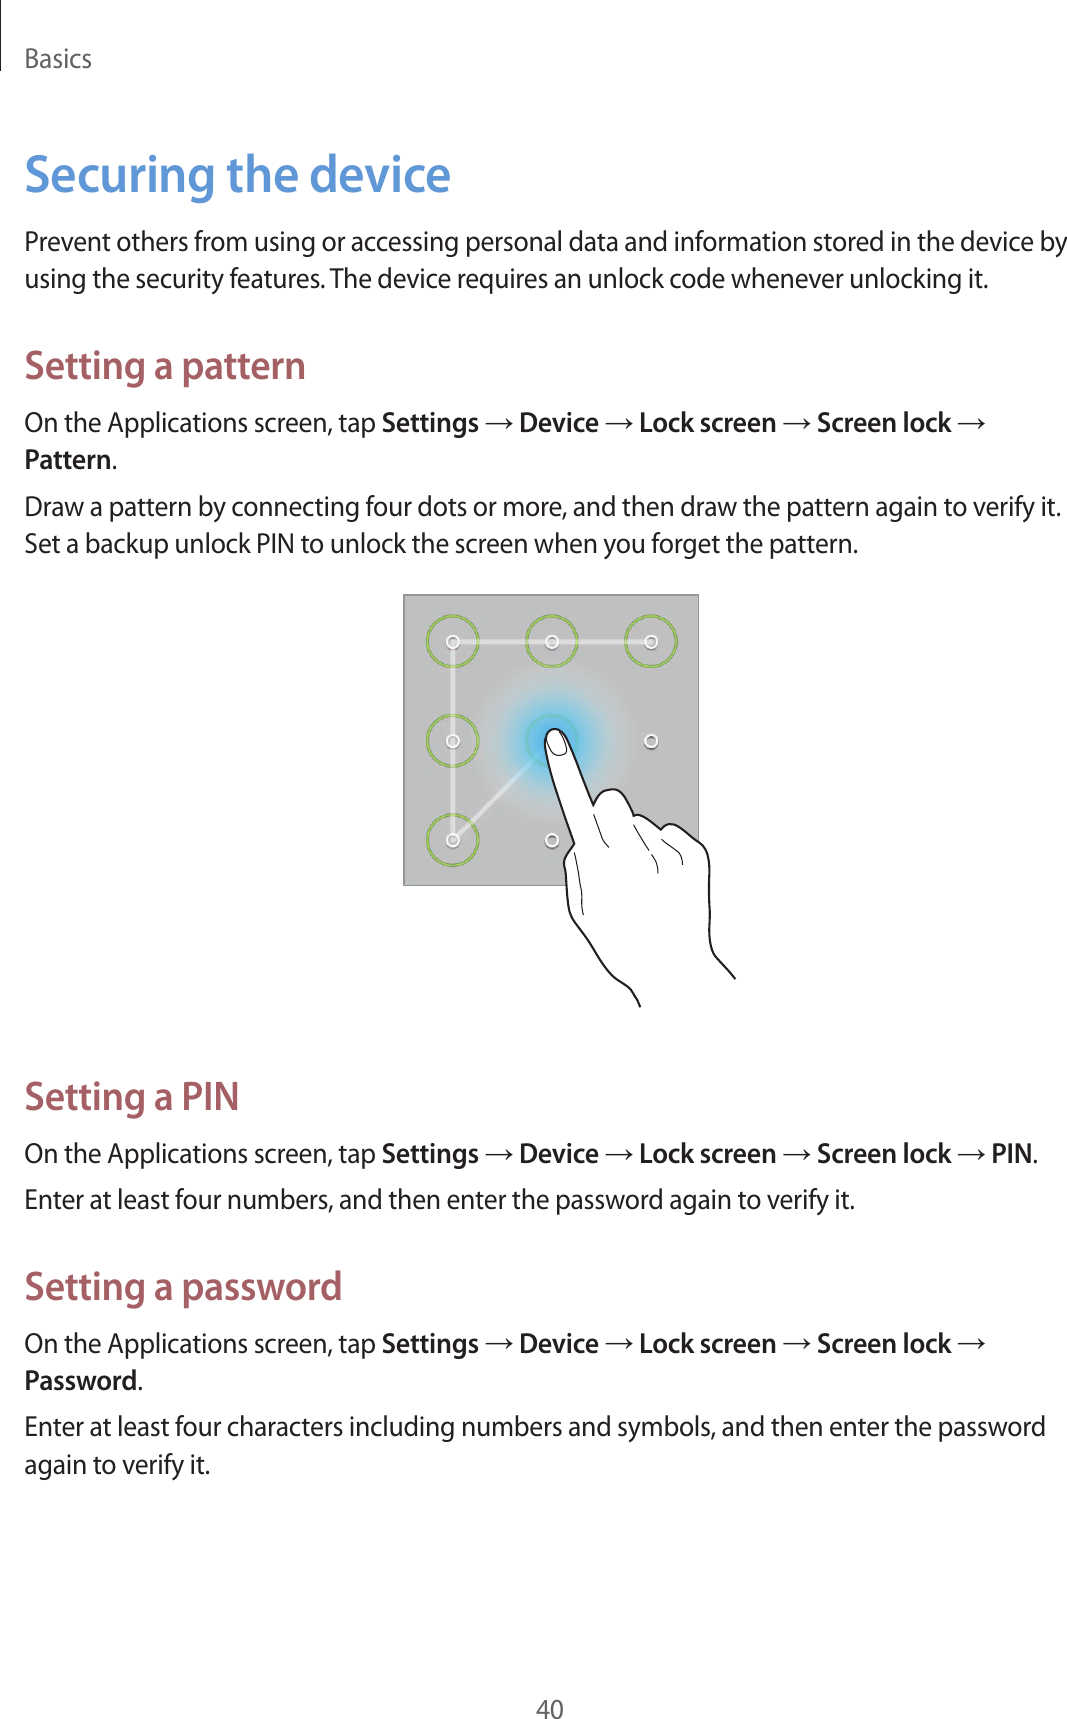 Basics40Securing the devicePrevent others from using or accessing personal data and information stored in the device by using the security features. The device requires an unlock code whenever unlocking it.Setting a patternOn the Applications screen, tap Settings → Device → Lock screen → Screen lock → Pattern.Draw a pattern by connecting four dots or more, and then draw the pattern again to verify it. Set a backup unlock PIN to unlock the screen when you forget the pattern.Setting a PINOn the Applications screen, tap Settings → Device → Lock screen → Screen lock → PIN.Enter at least four numbers, and then enter the password again to verify it.Setting a passwordOn the Applications screen, tap Settings → Device → Lock screen → Screen lock → Password.Enter at least four characters including numbers and symbols, and then enter the password again to verify it.